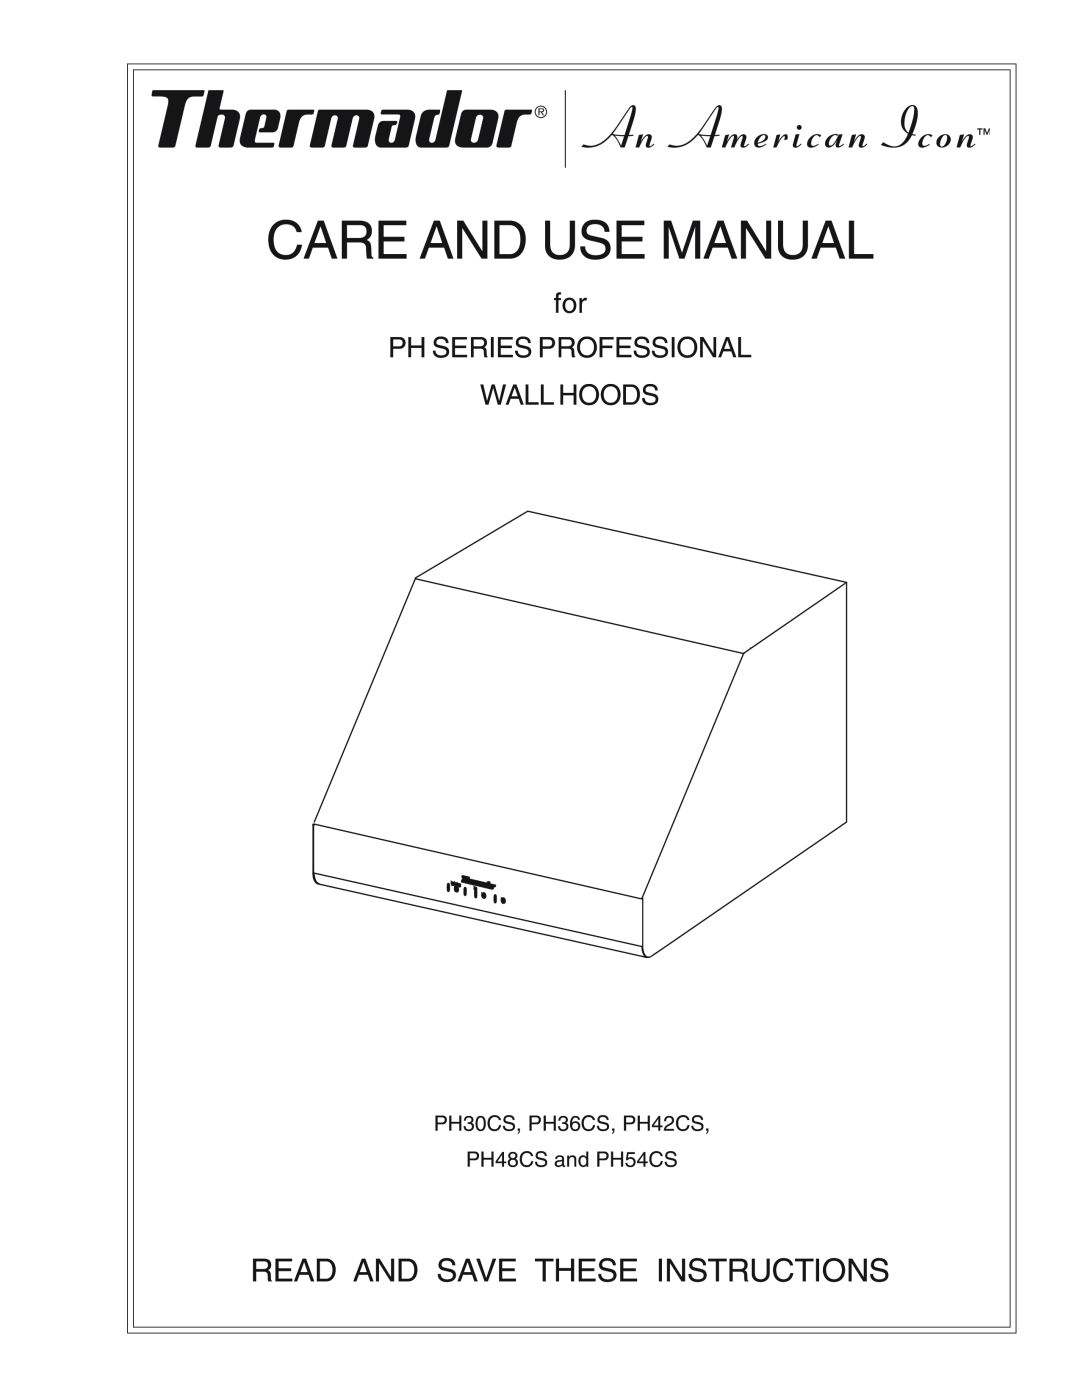 Thermador PH48CS, PH54CS manual Read And Save These Instructions, Care And Use Manual, Ph Series Professional, Wall Hoods 